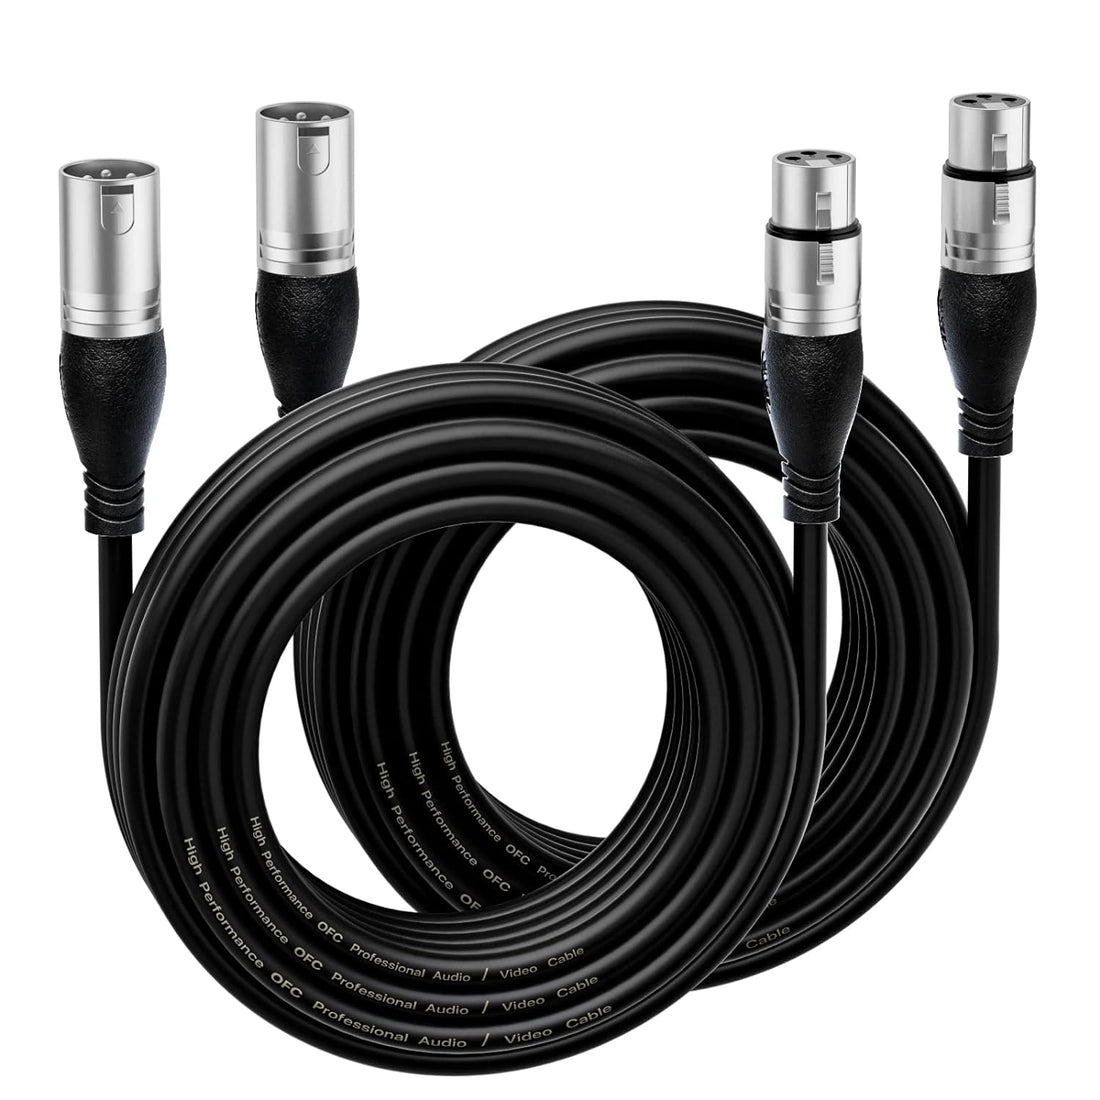 EBXYA XLR Cable 20 Ft 2 Packs - Premium Microphone Cable Patch Speaker Cable 3-Pin XLR Male to Female, Black